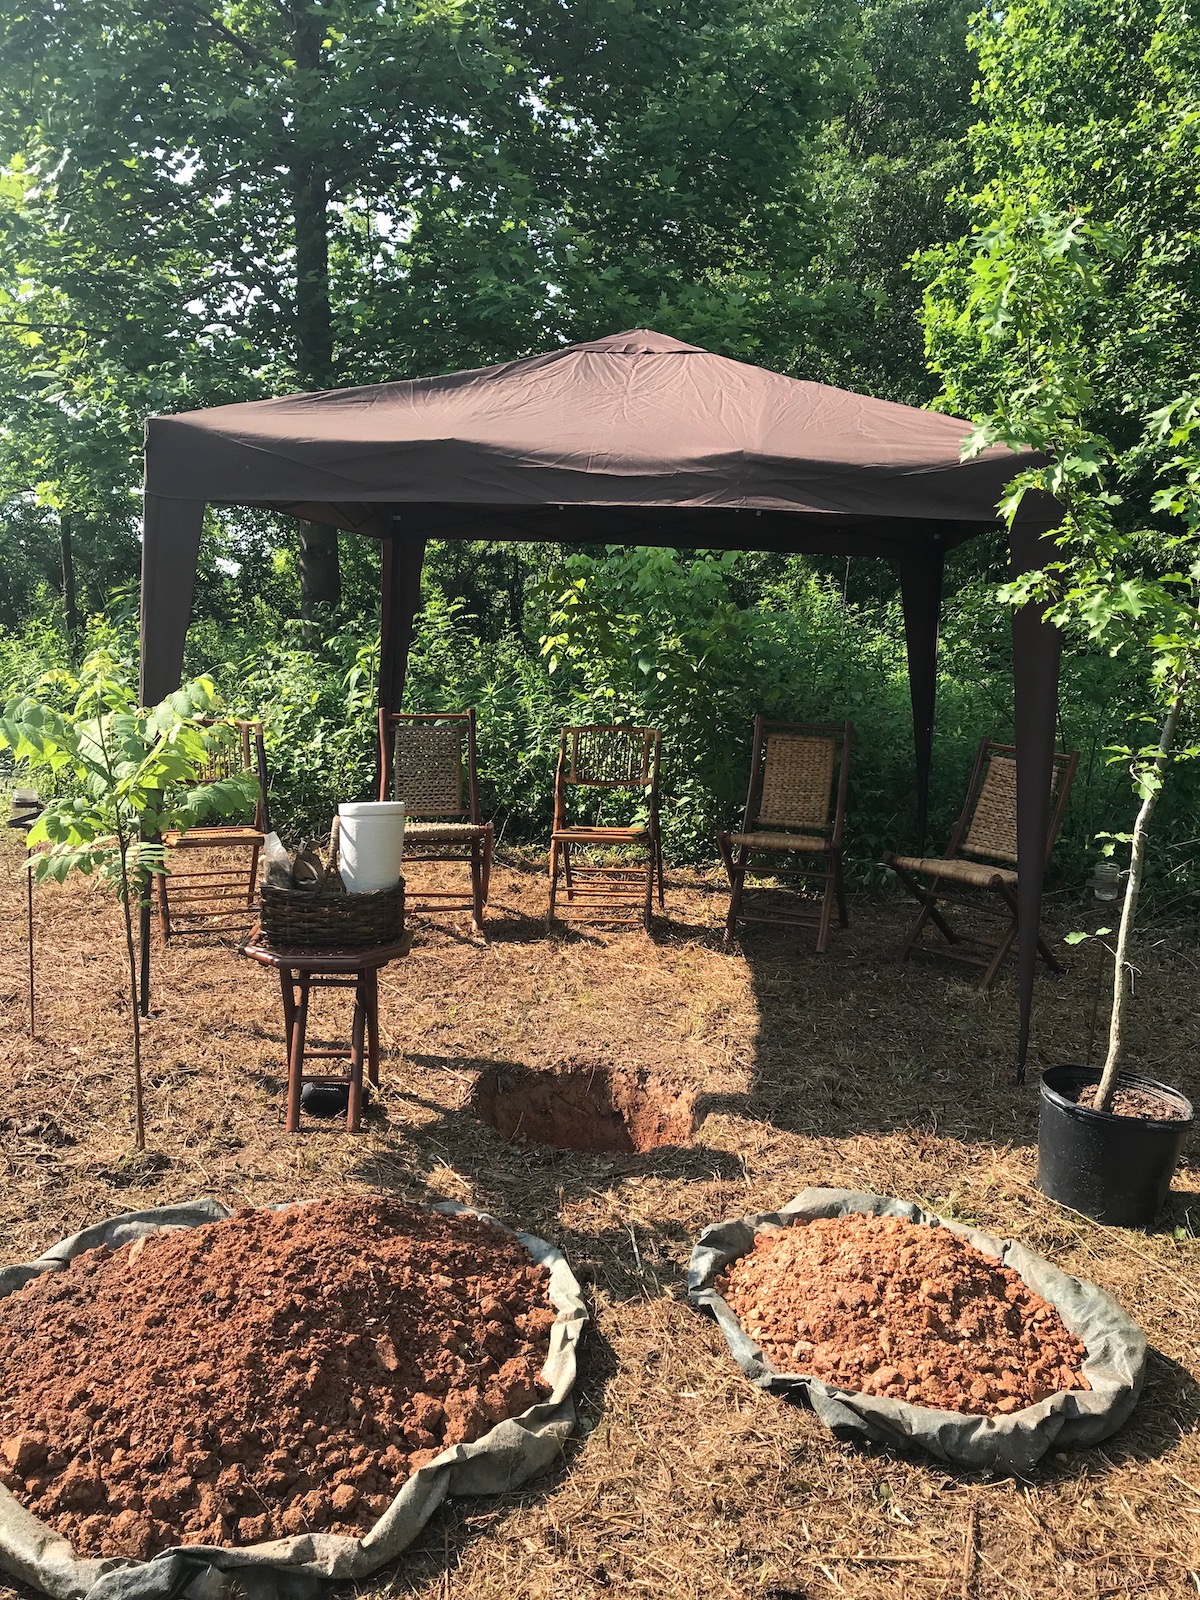 gravesite setup for a burial of cremated remains